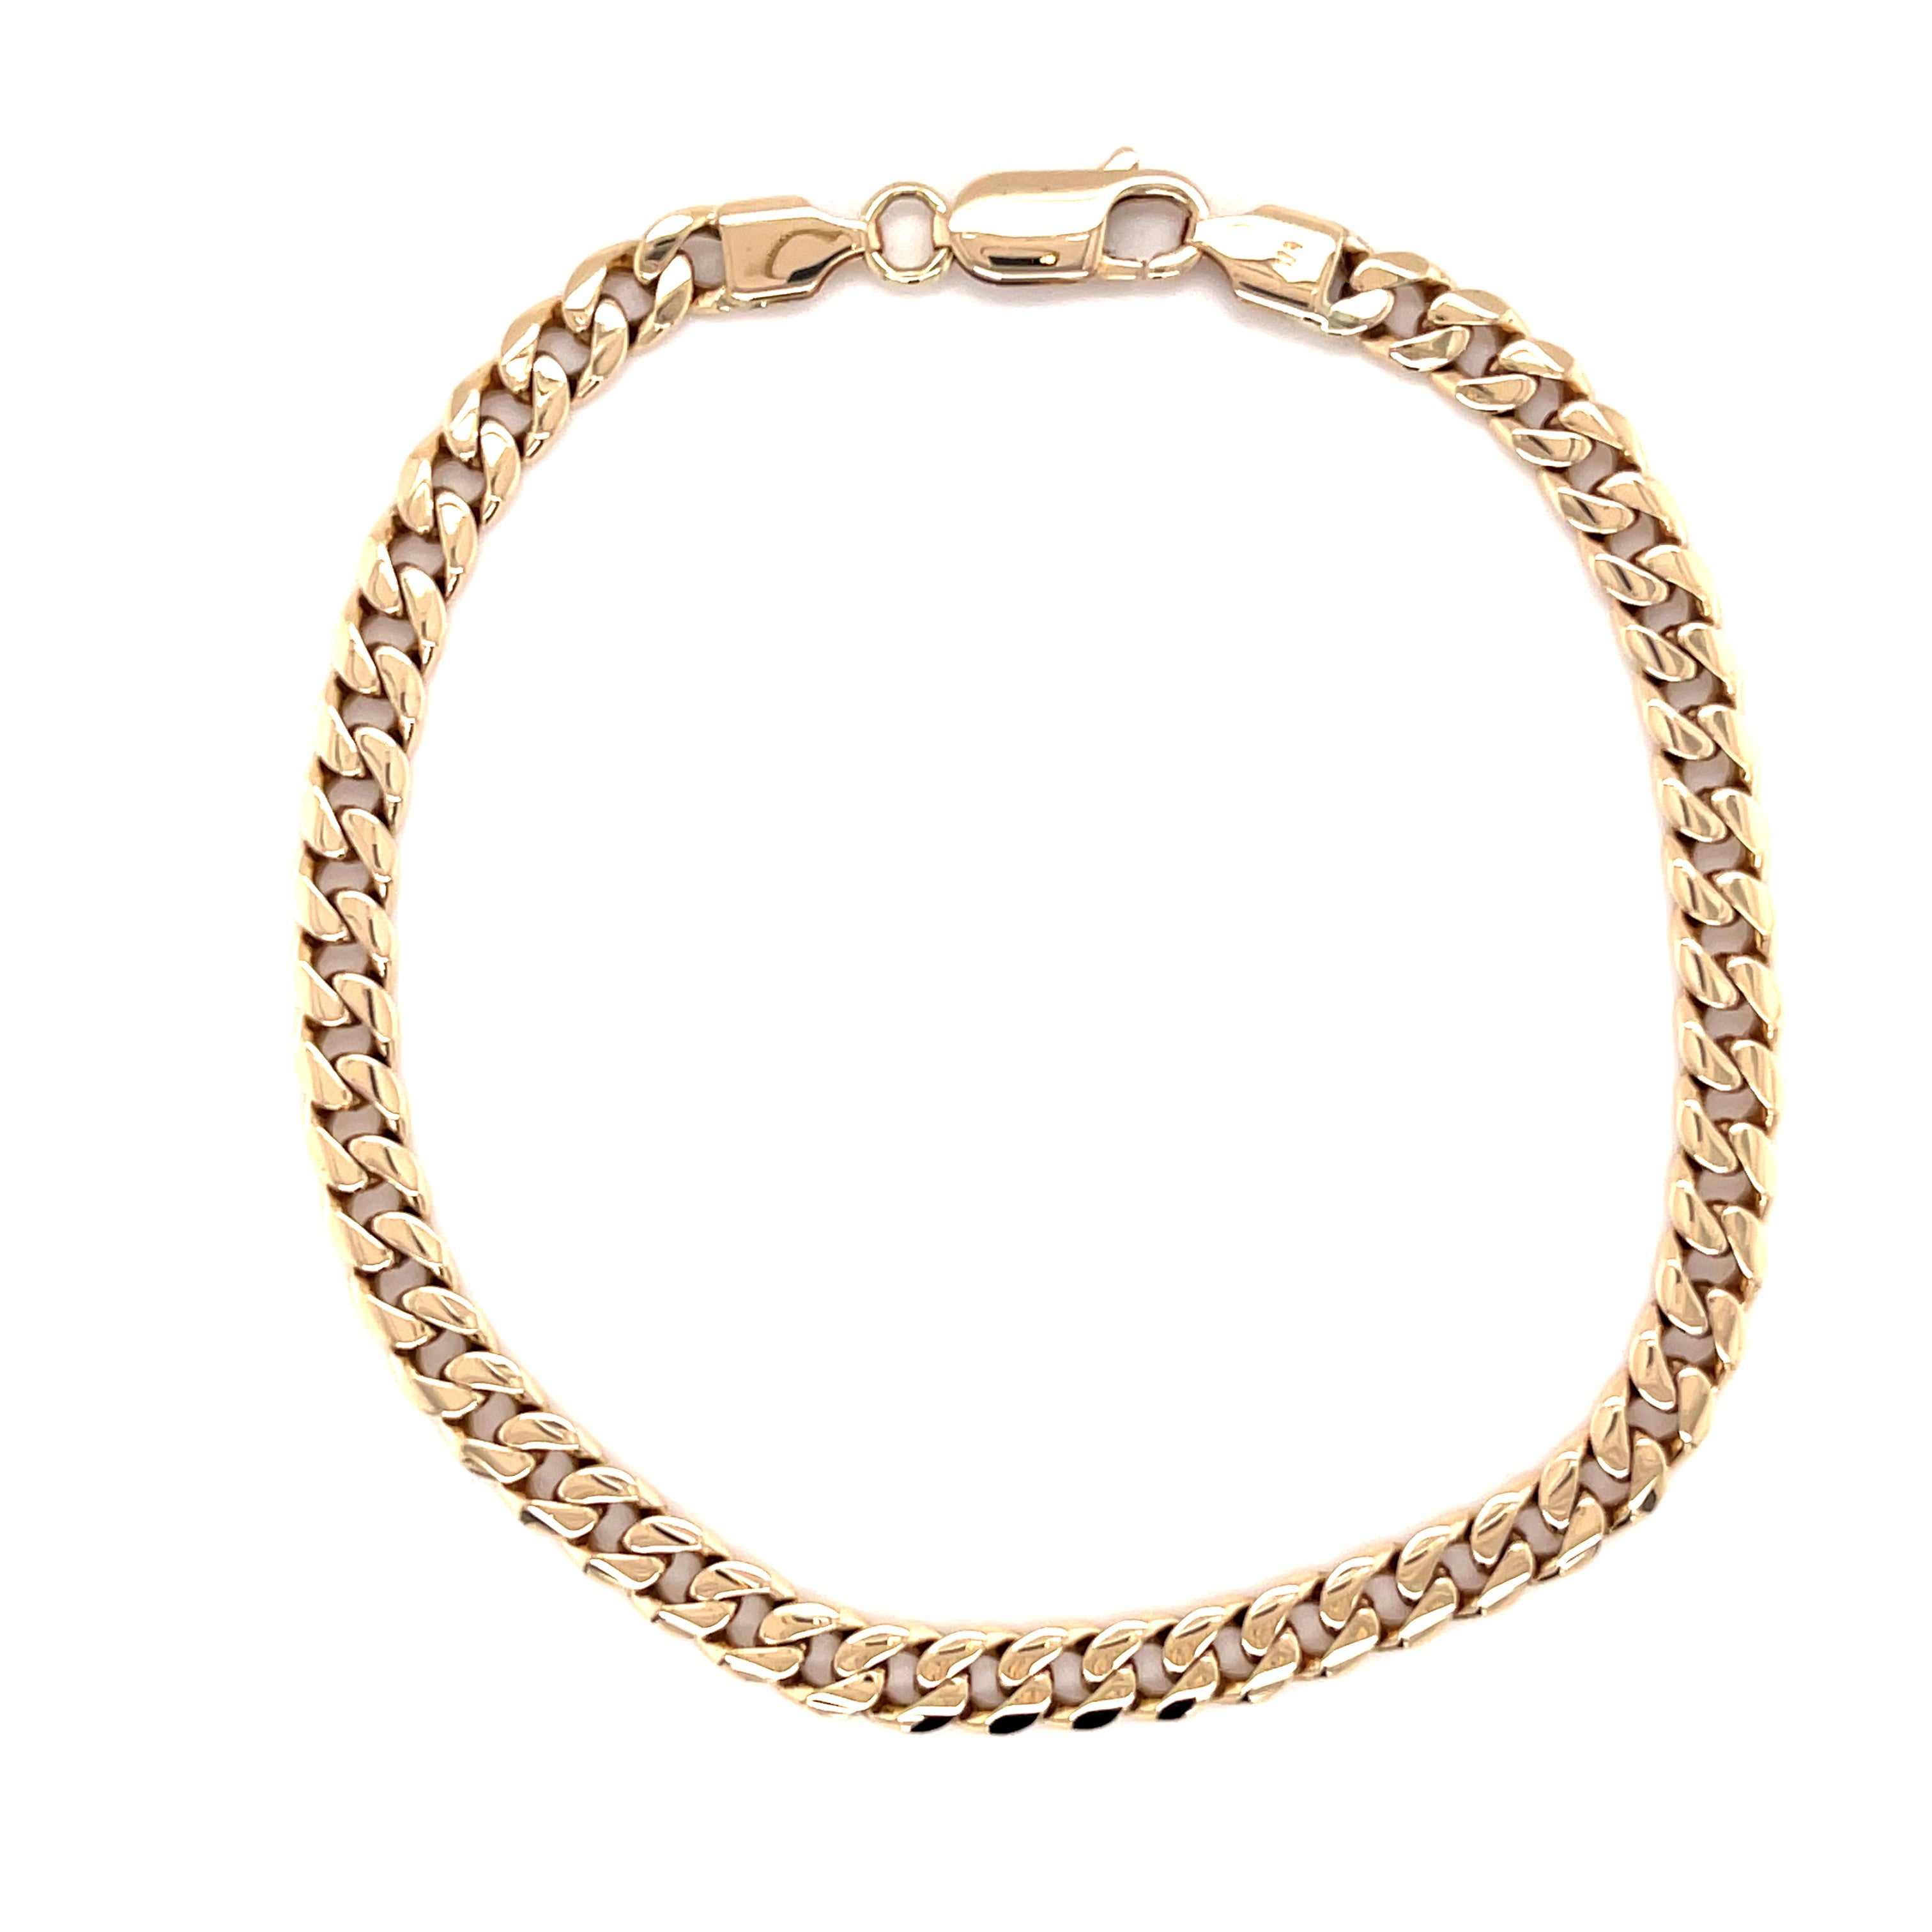 9ct Yellow Gold 8.5 Inch Curb Link Bracelet - 12.55g